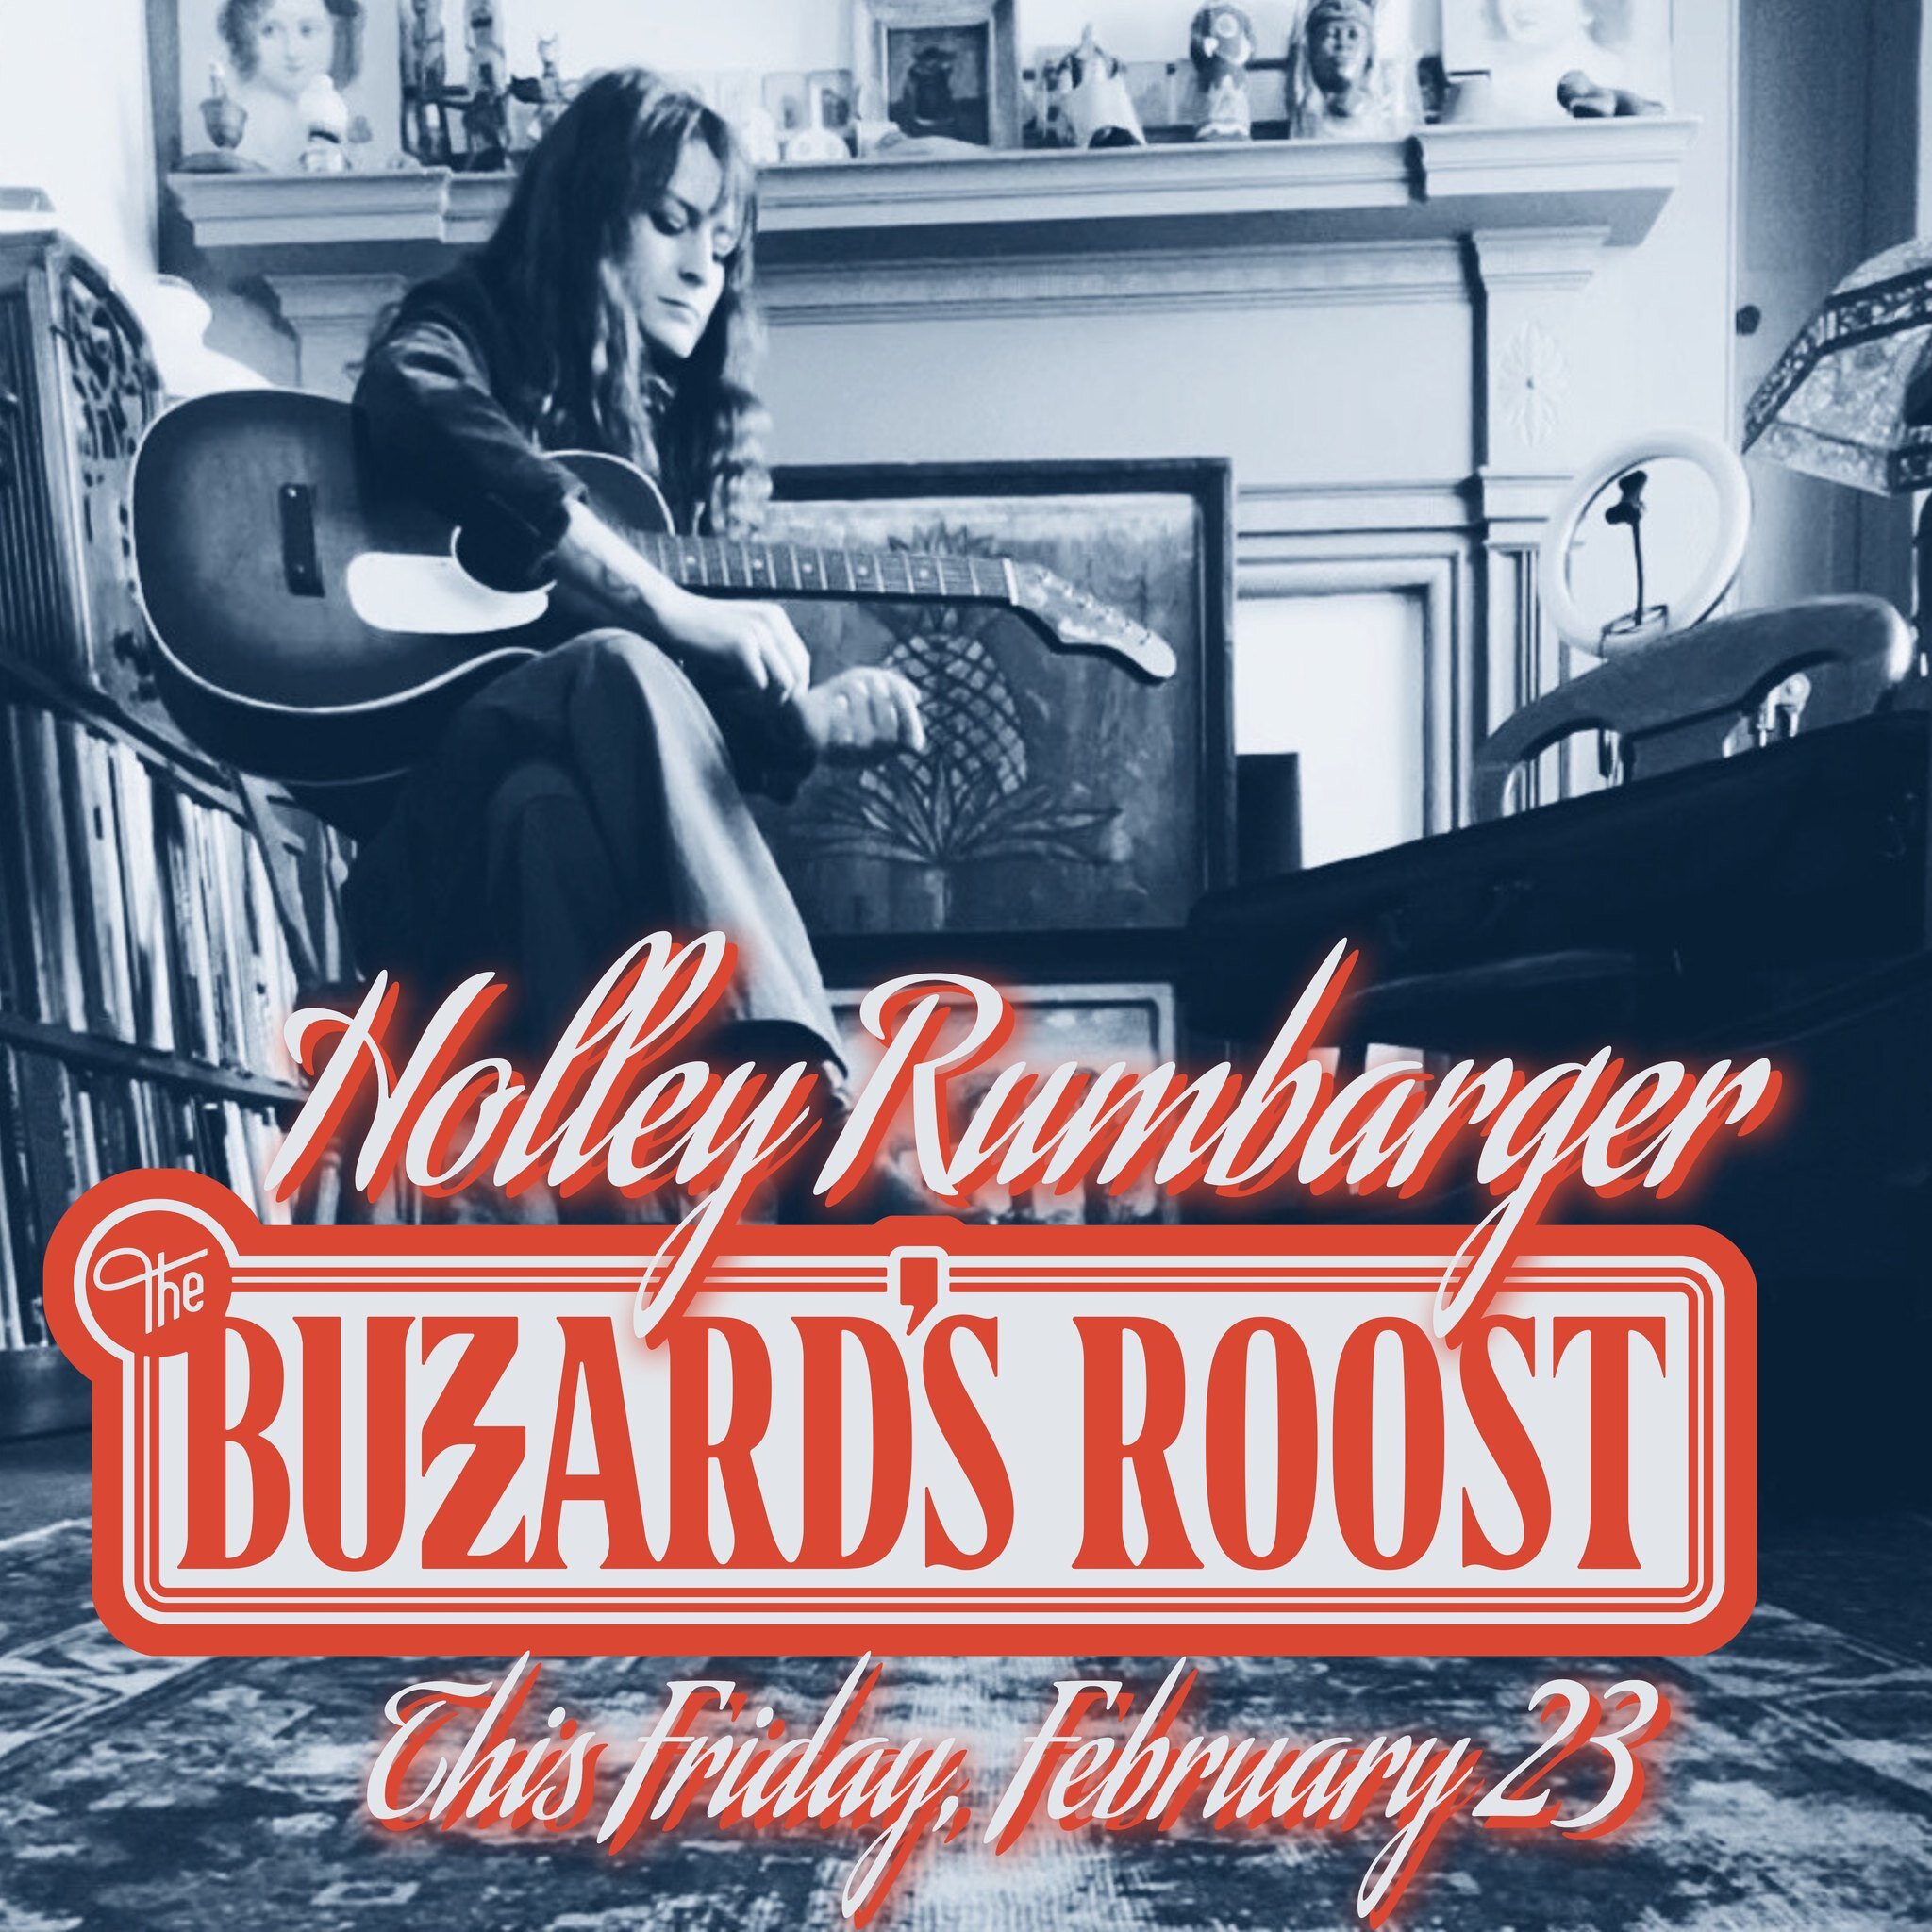 TGIF 🥳 Soup of the day is French Onion for lunch, and we have a barbecue chicken bacon sandwich all day long! Holley Rumbarger at 9PM, NO COVER! 

Make sure to go see &quot;Ordinary People&quot; at @lltarabian this weekend and hit us up for drinks a